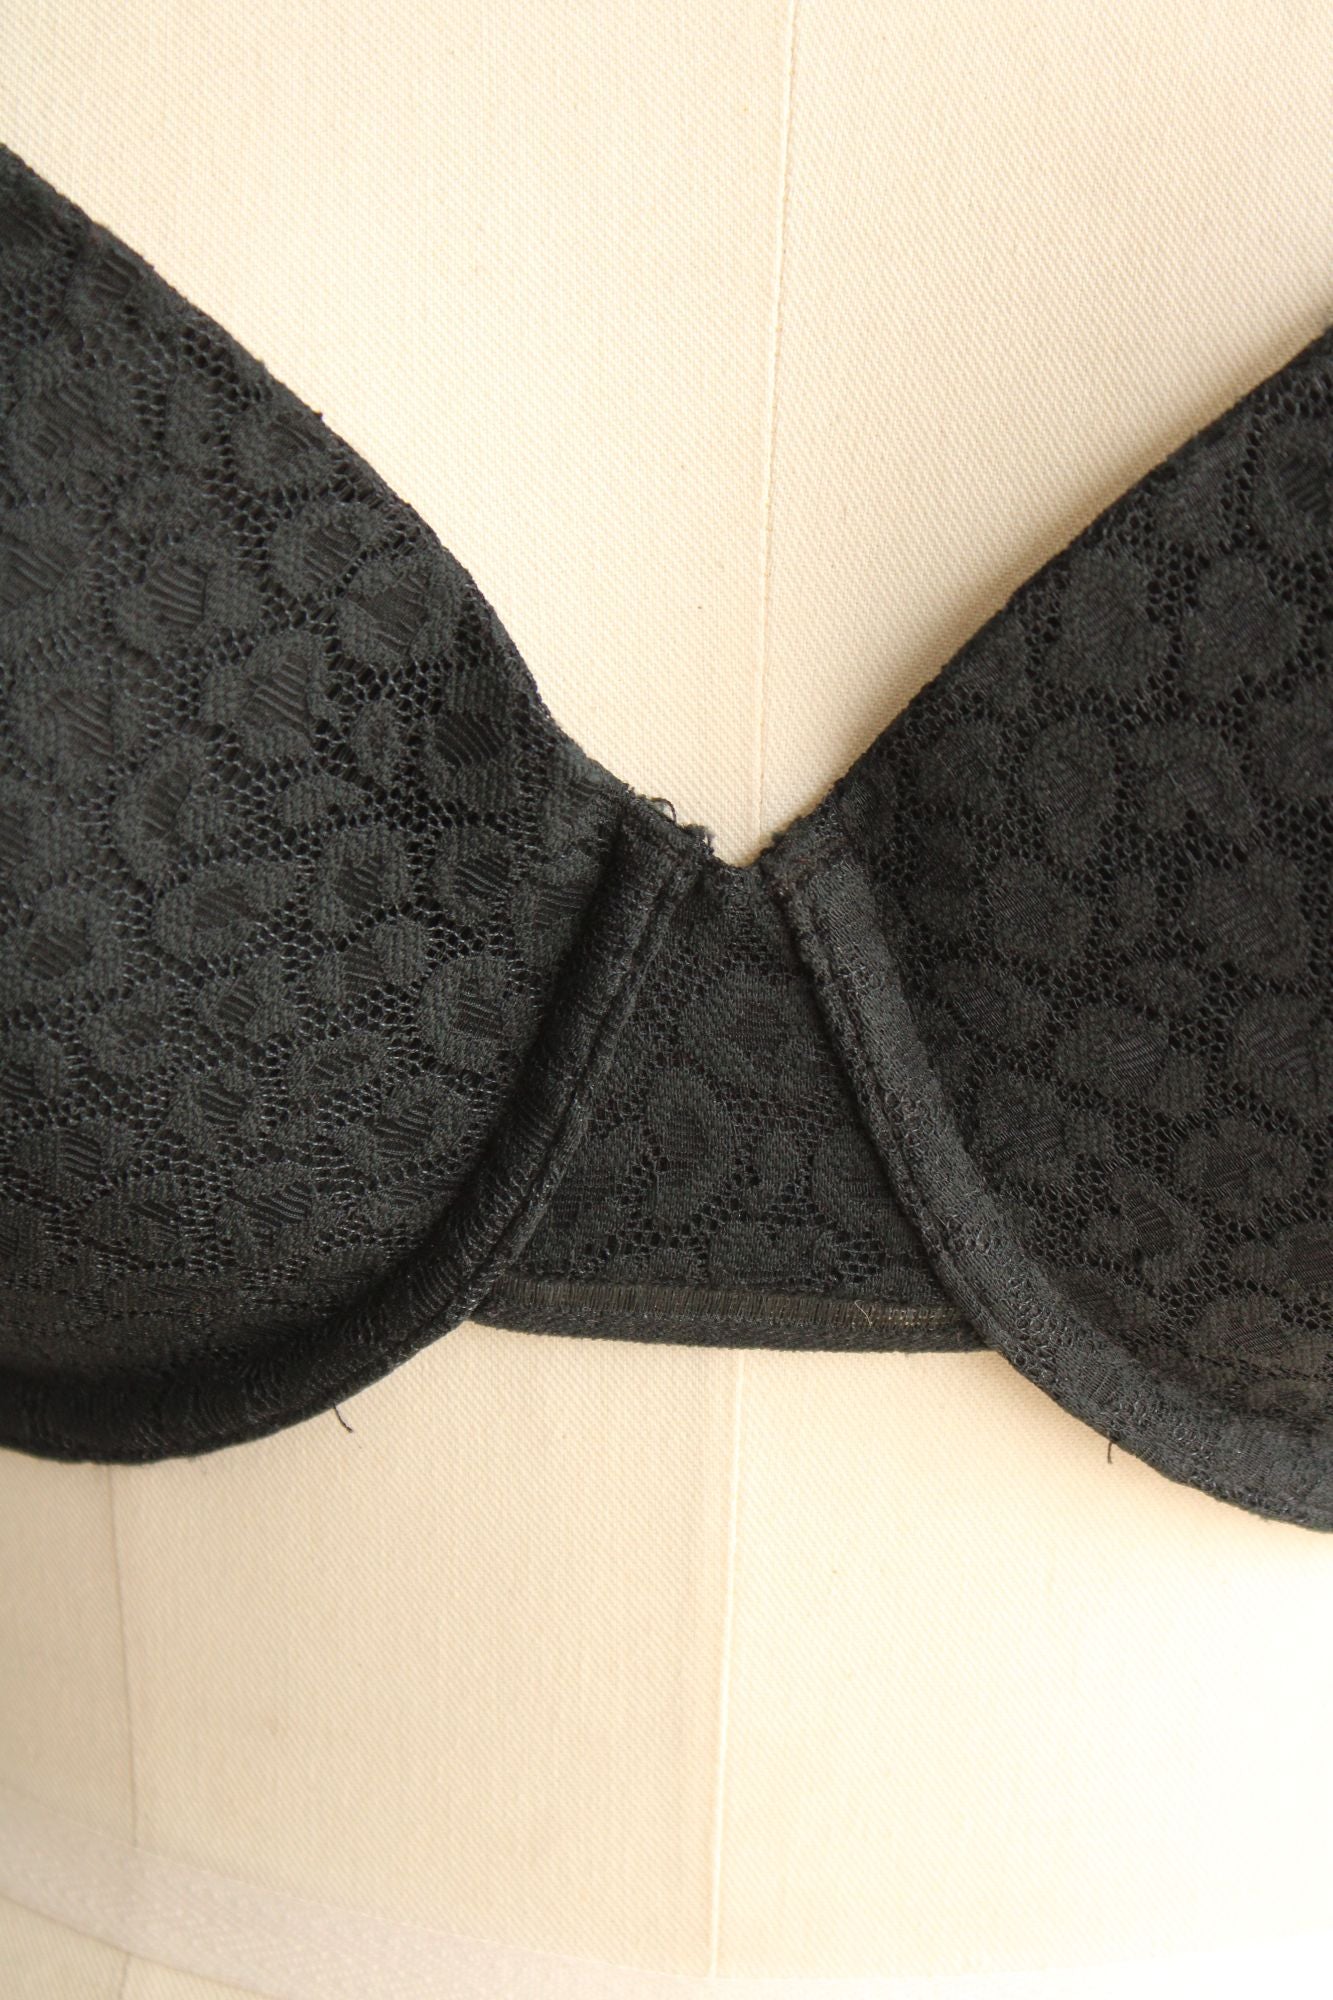 Auden womens bra, Black Lace, Size 36DD, Underwire, Convertible to racer back